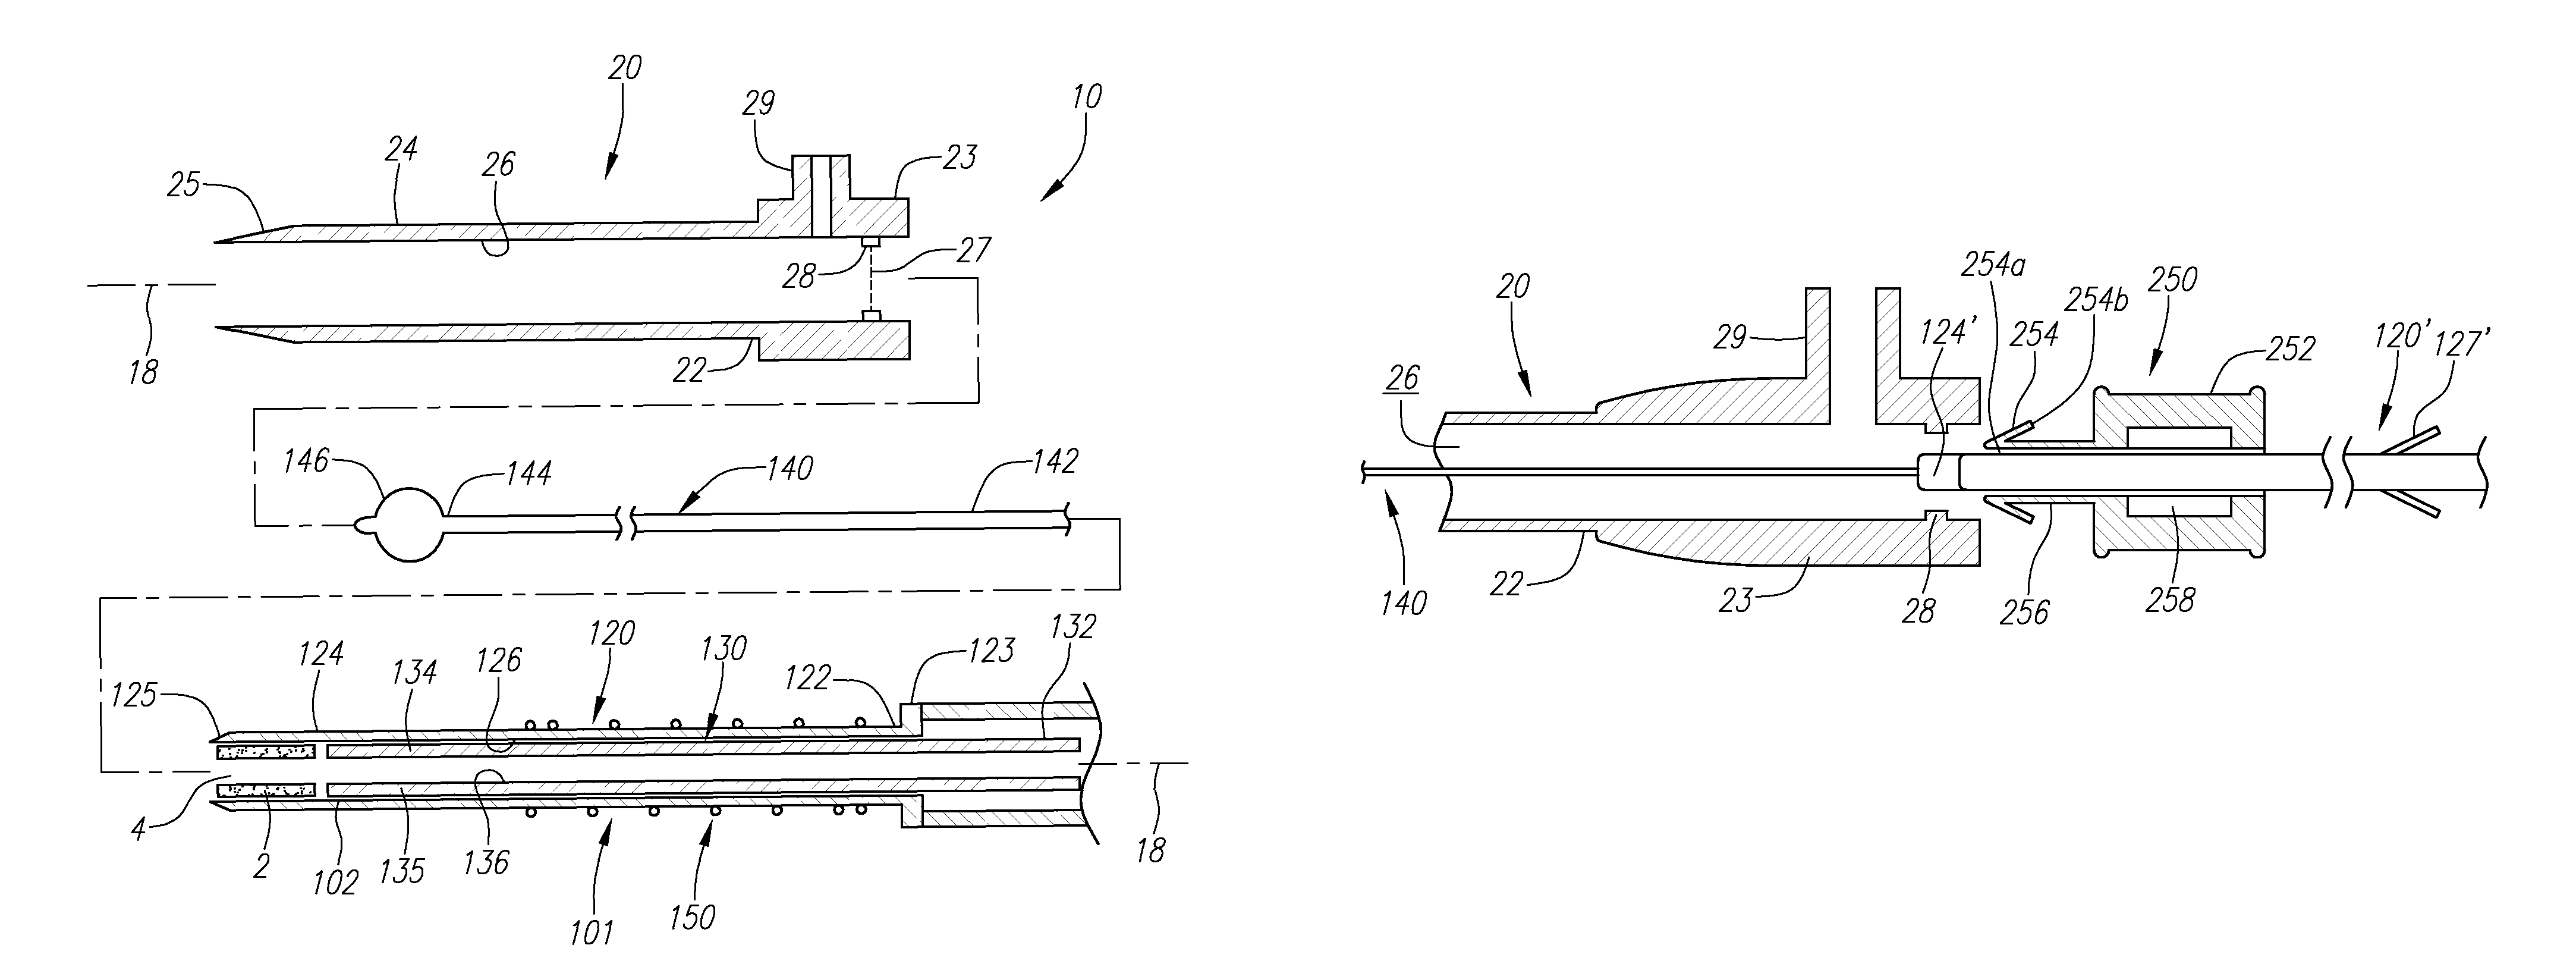 Apparatus and methods for sealing a vascular puncture